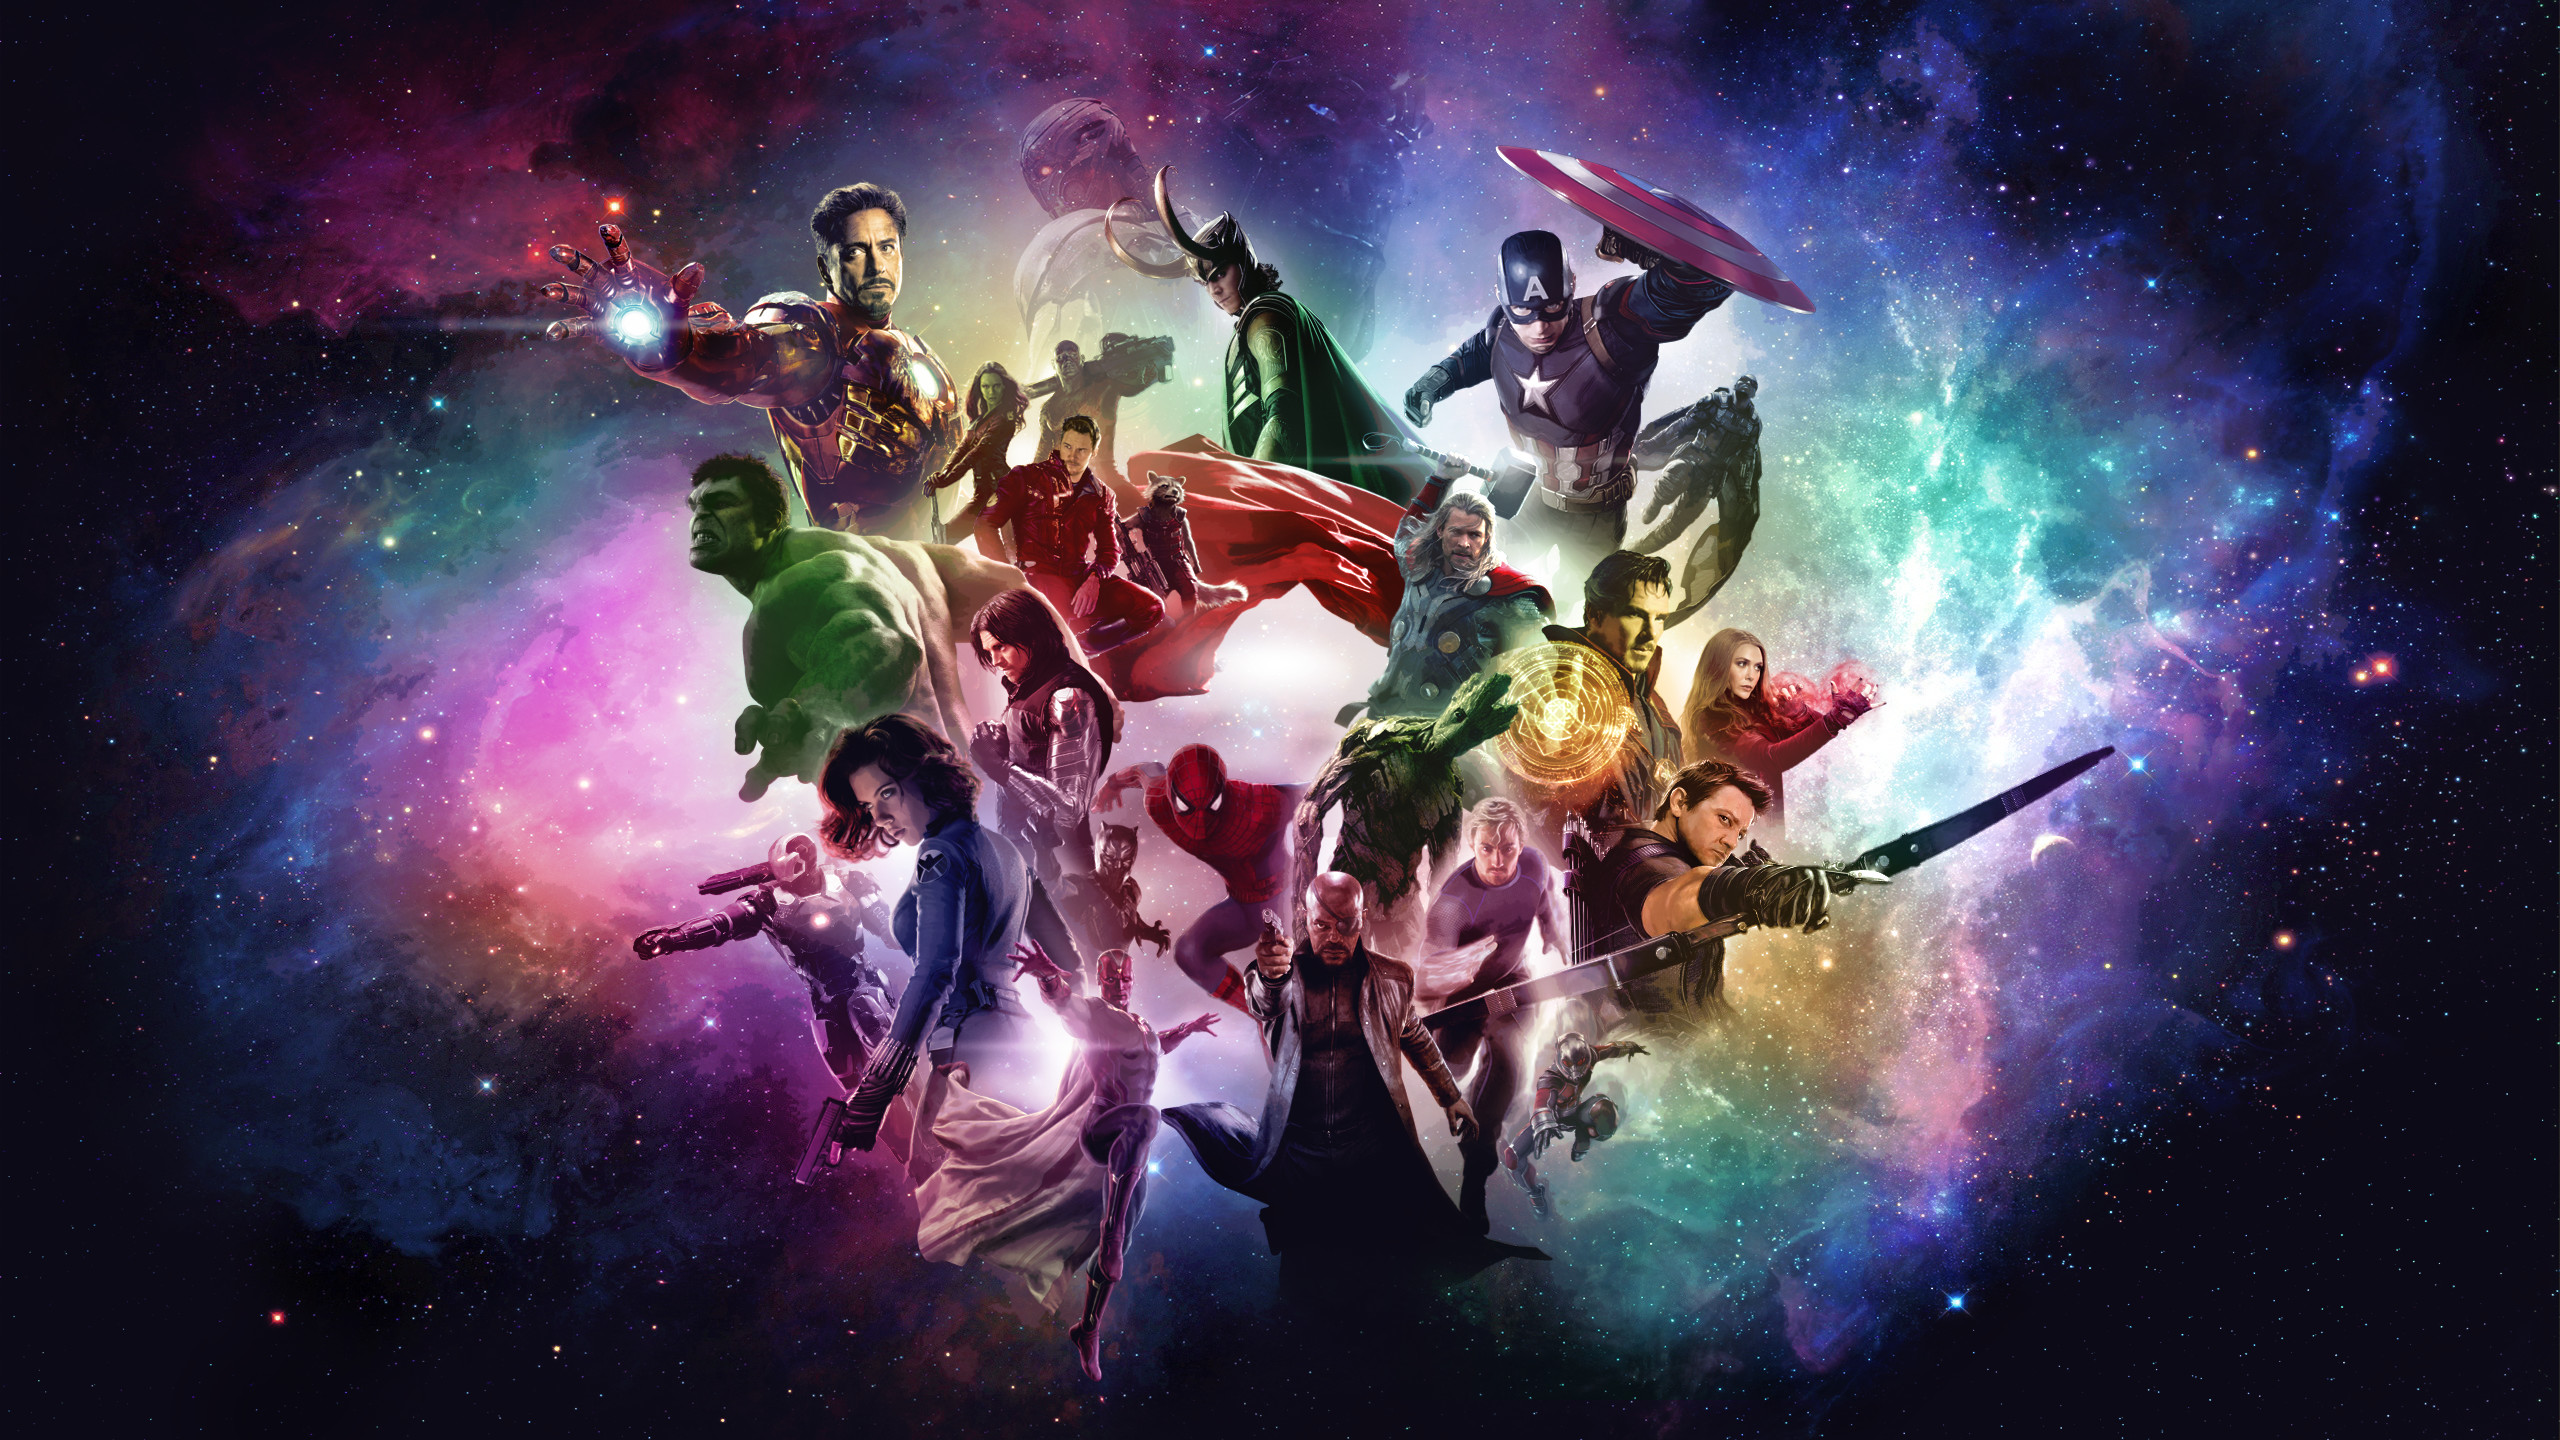 Marvel Cinematic Universe Wallpaper by RockLou Marvel Cinematic Universe Wallpaper by RockLou